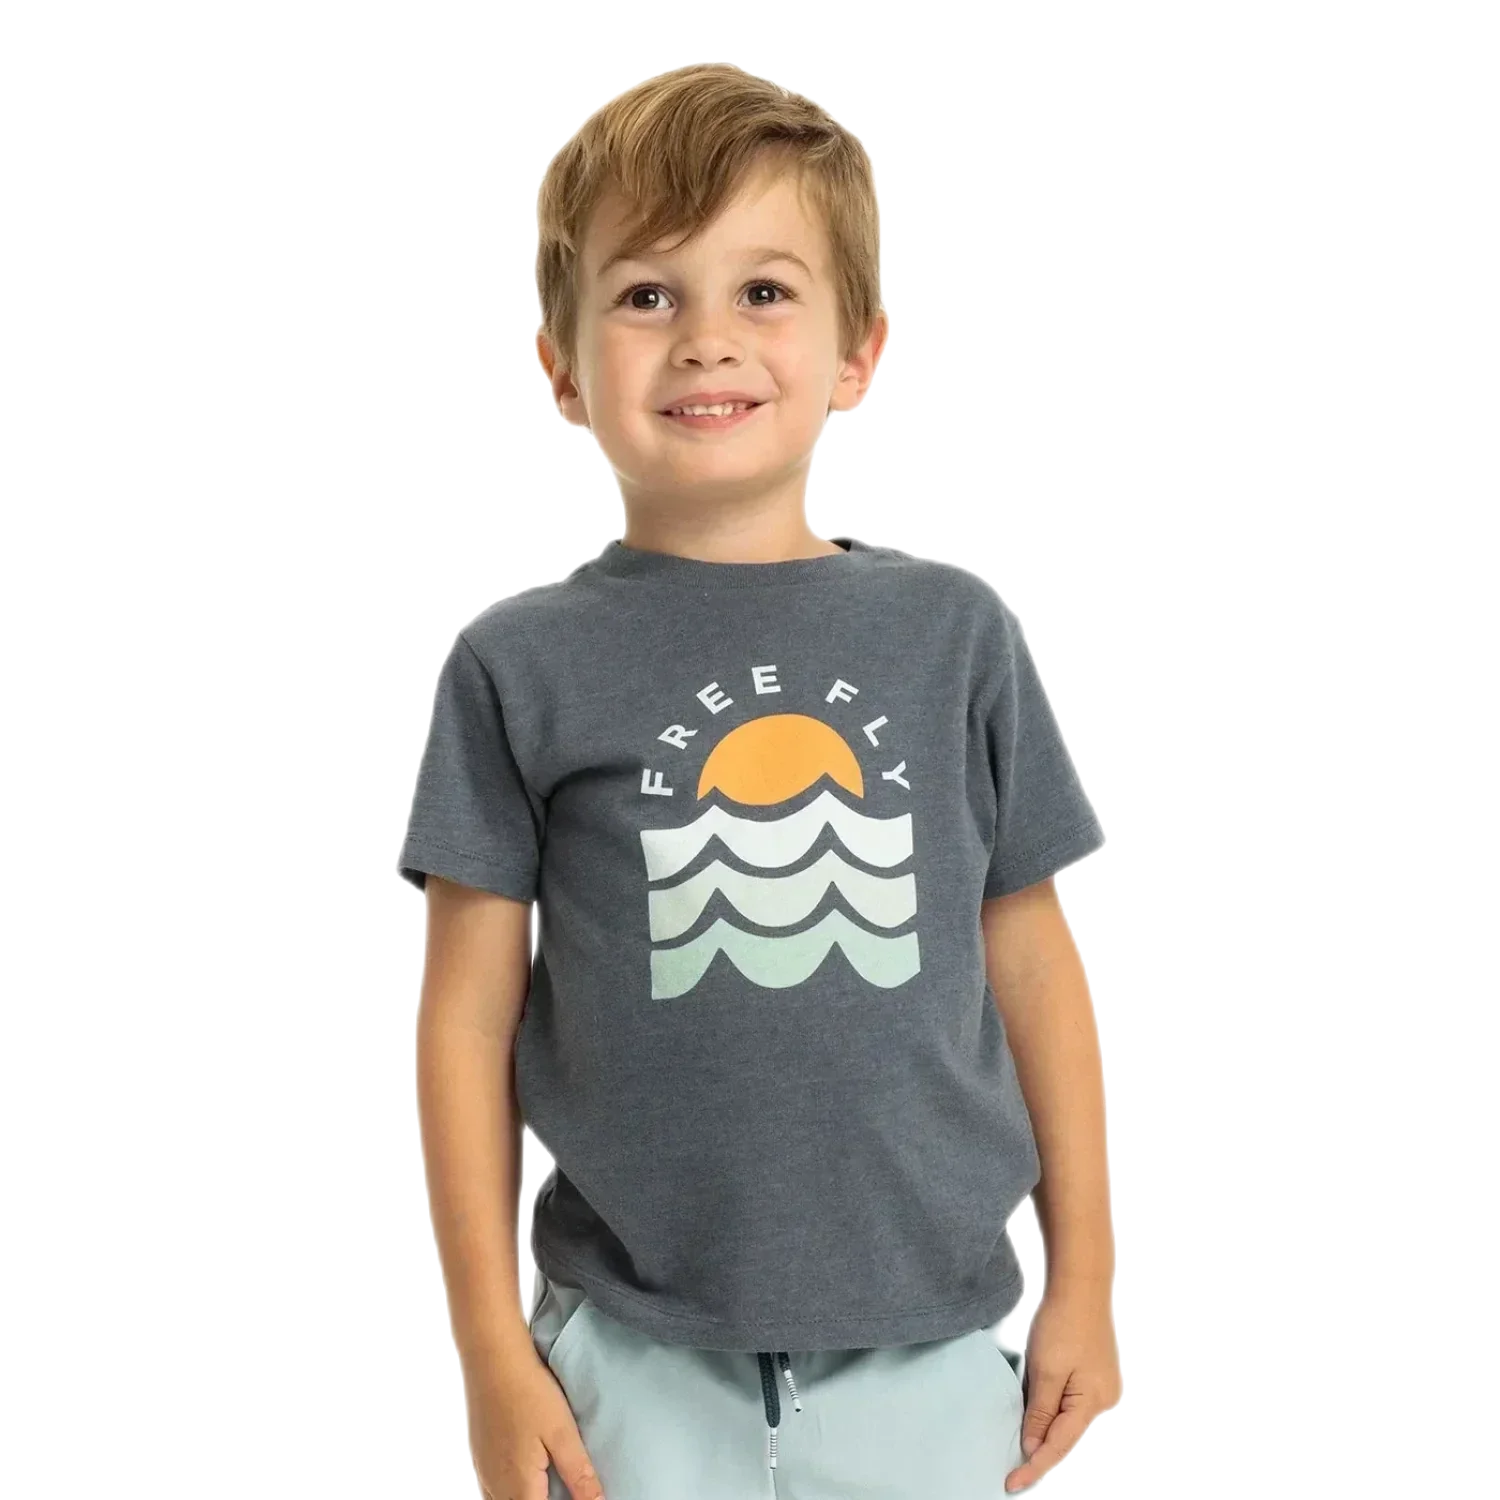 Free Fly Apparel 03. KIDS|BABY - BABY - BABY TOPS Toddler Perfect Day Tee HEATHER STORM CLOUD